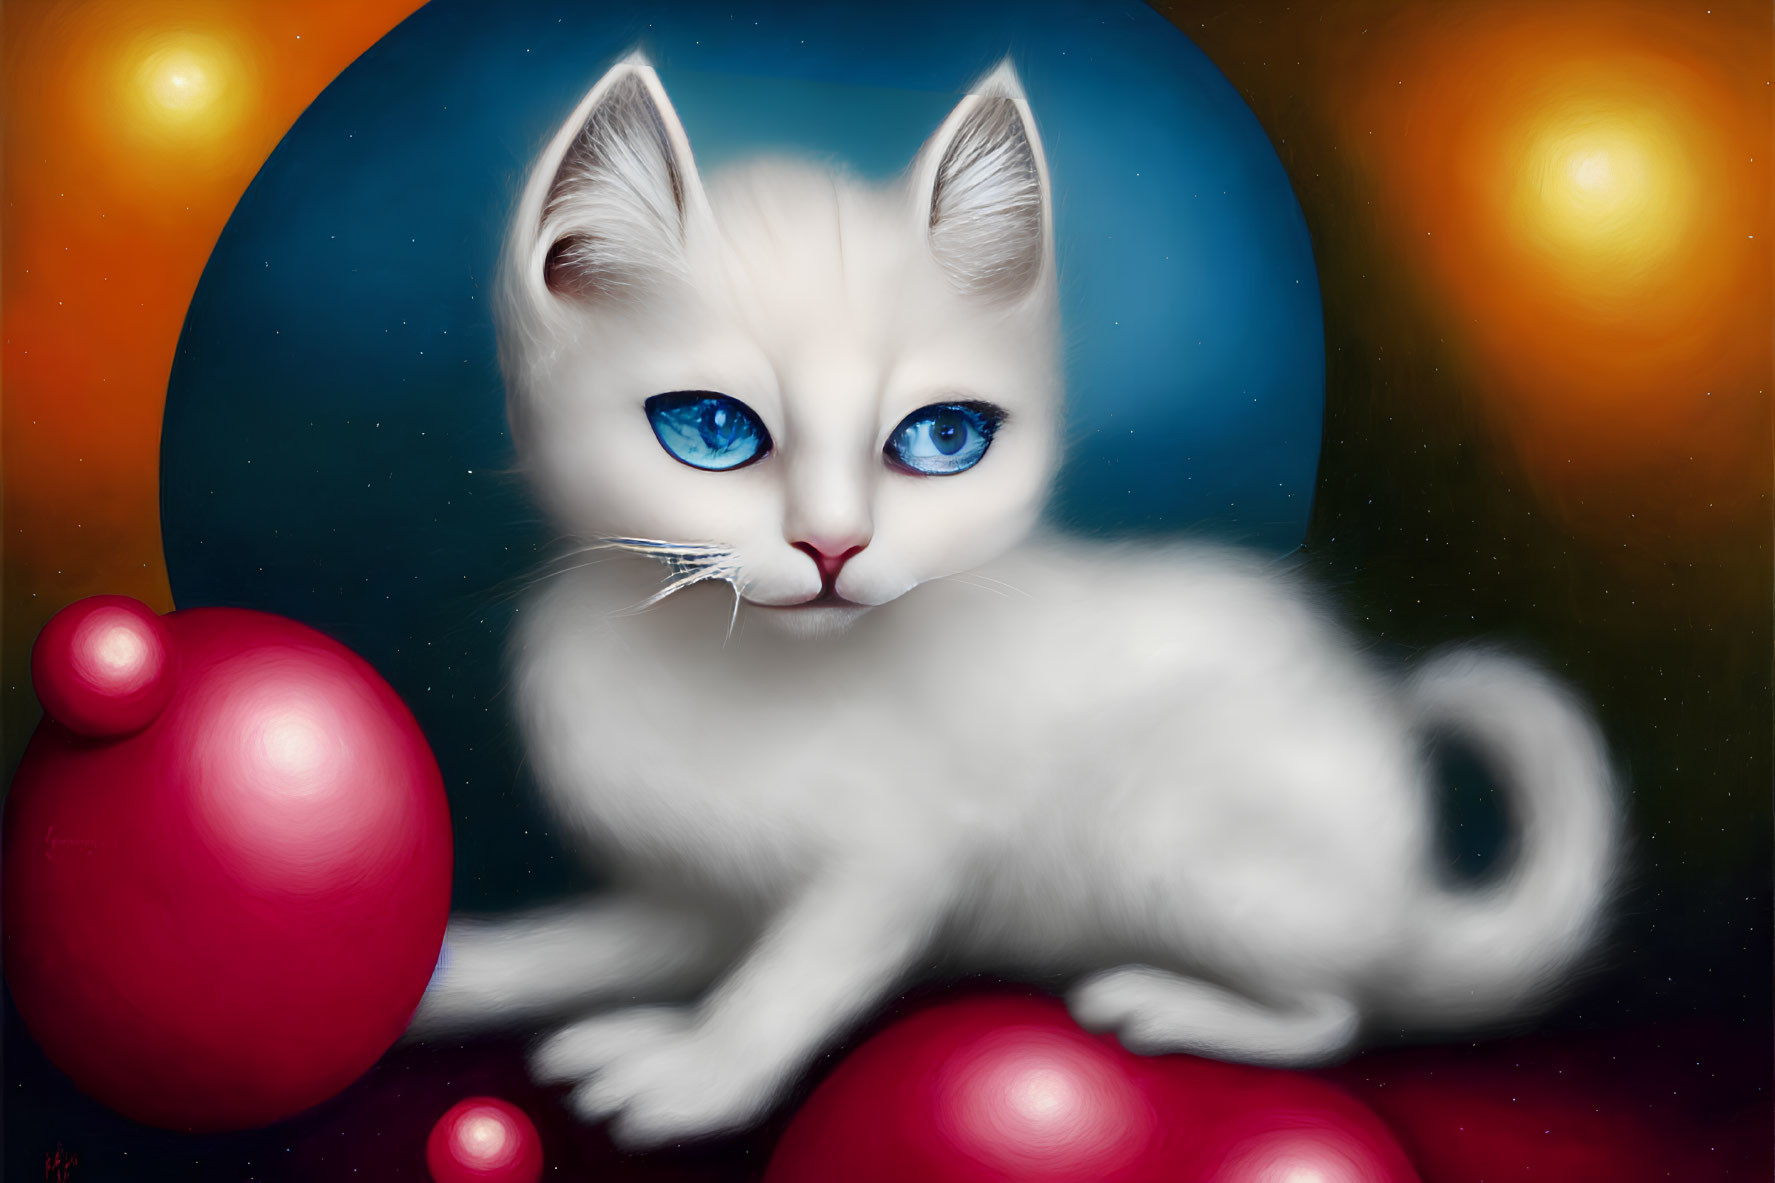 White Kitten with Blue Eyes Surrounded by Red and Bright Colored Orbs